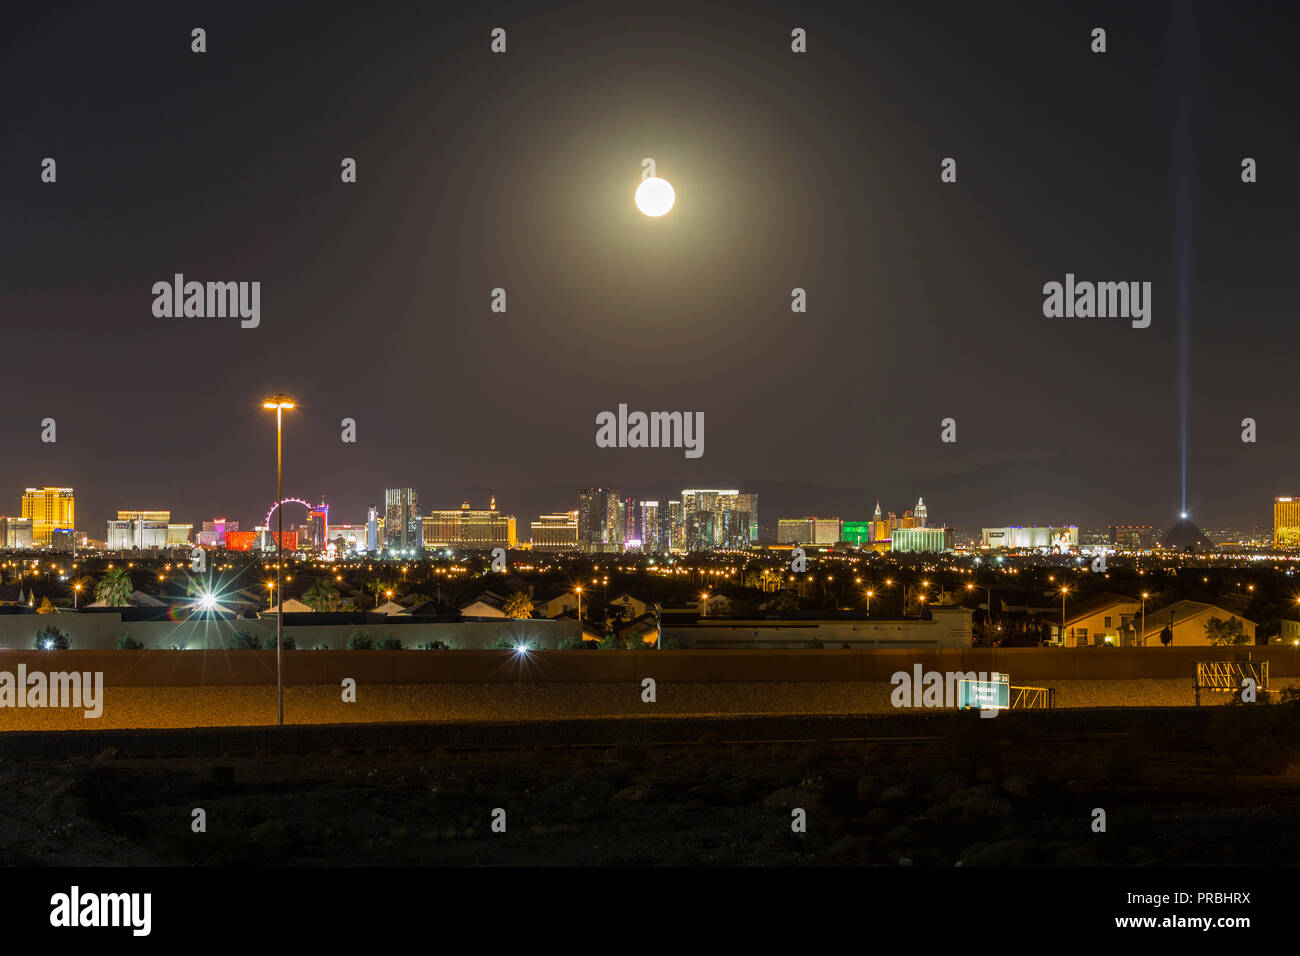 Las Vegas, Nevada, USA - September 25, 2018:  Moon rising over the lights of the Las Vegas strip in Southern Nevada. Stock Photo